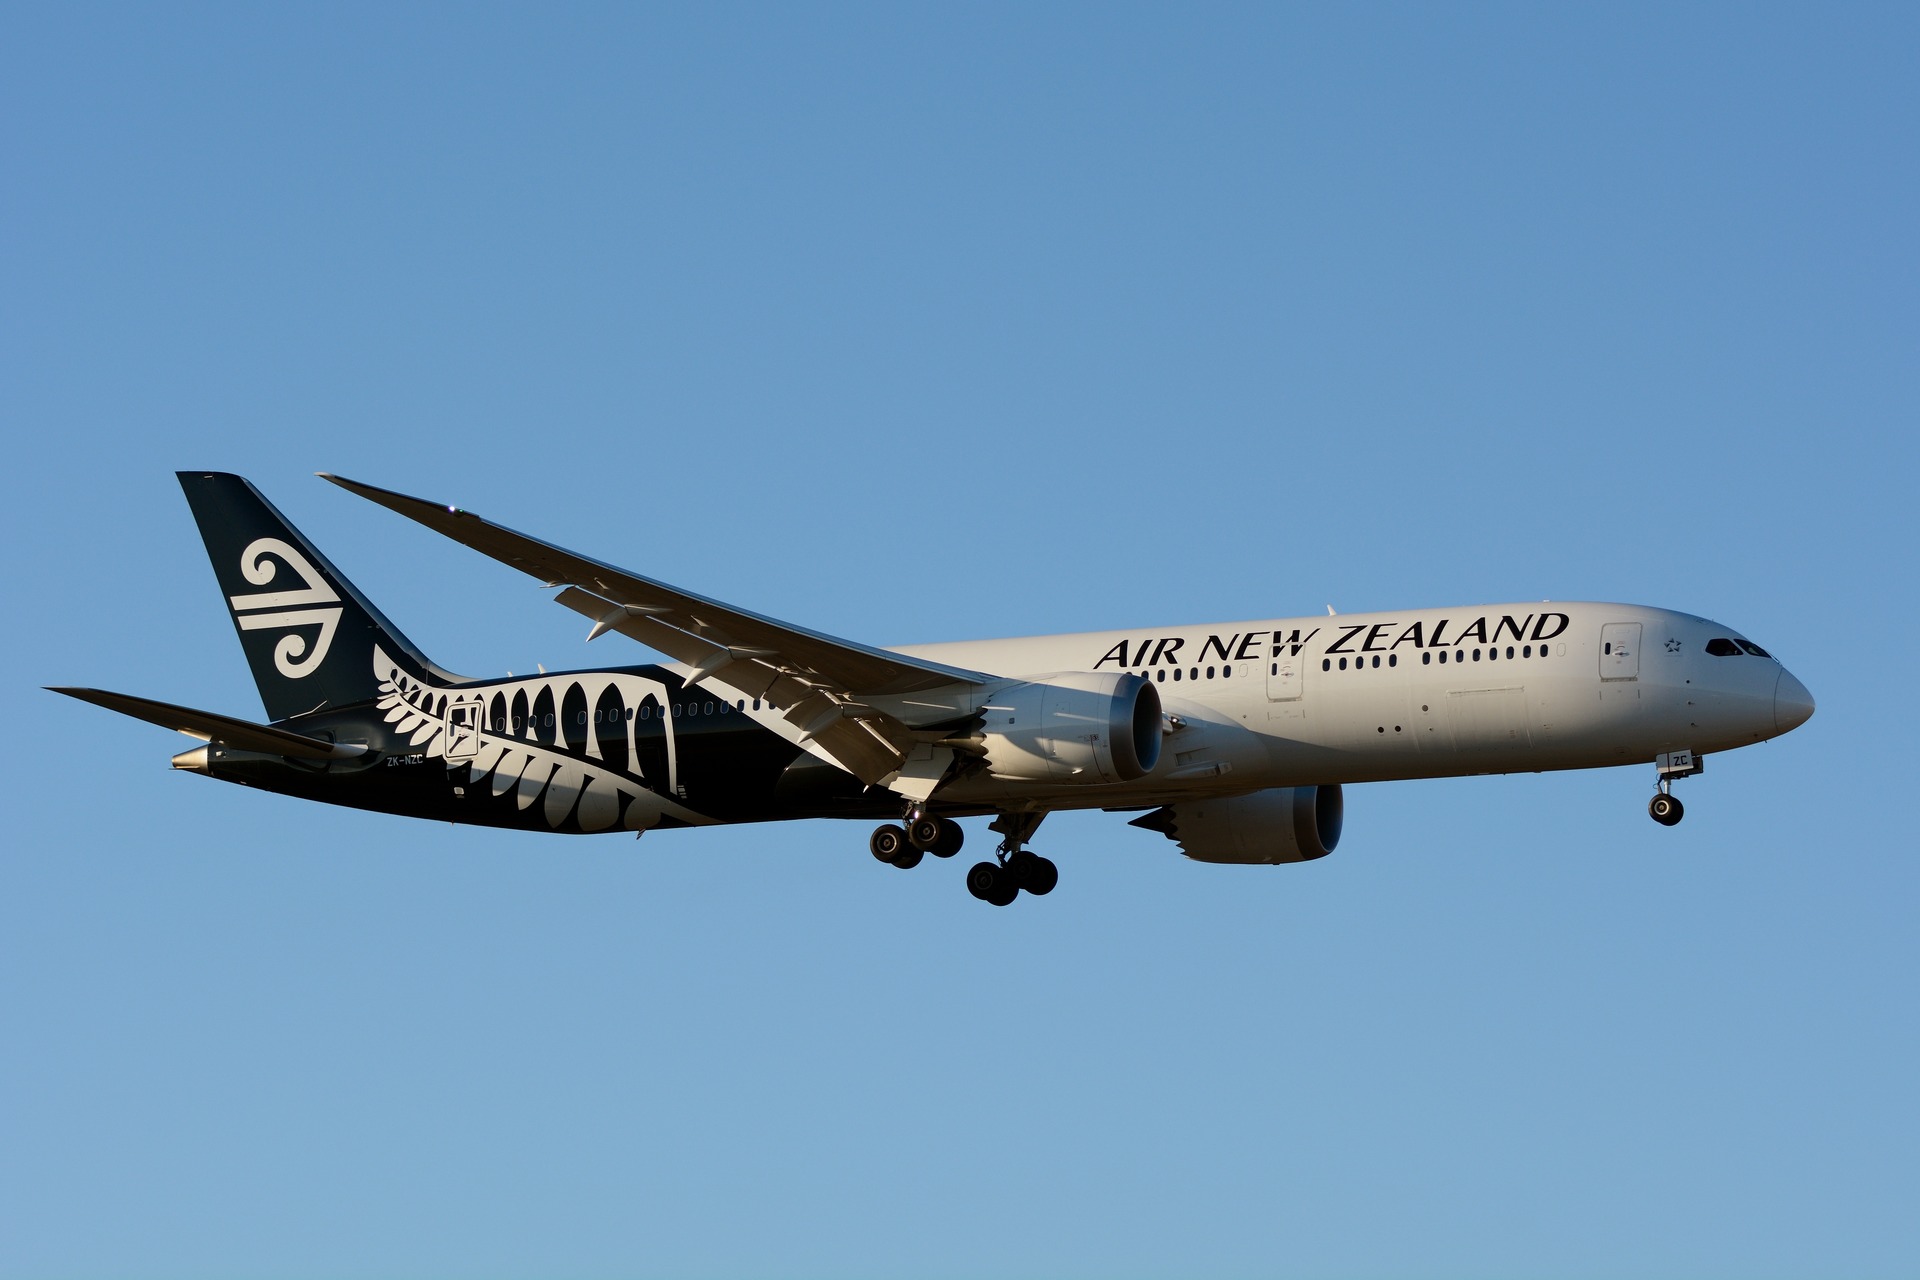 Actor's love affair with Kiwis lands him starring role in new Air NZ video  – Travel Monitor